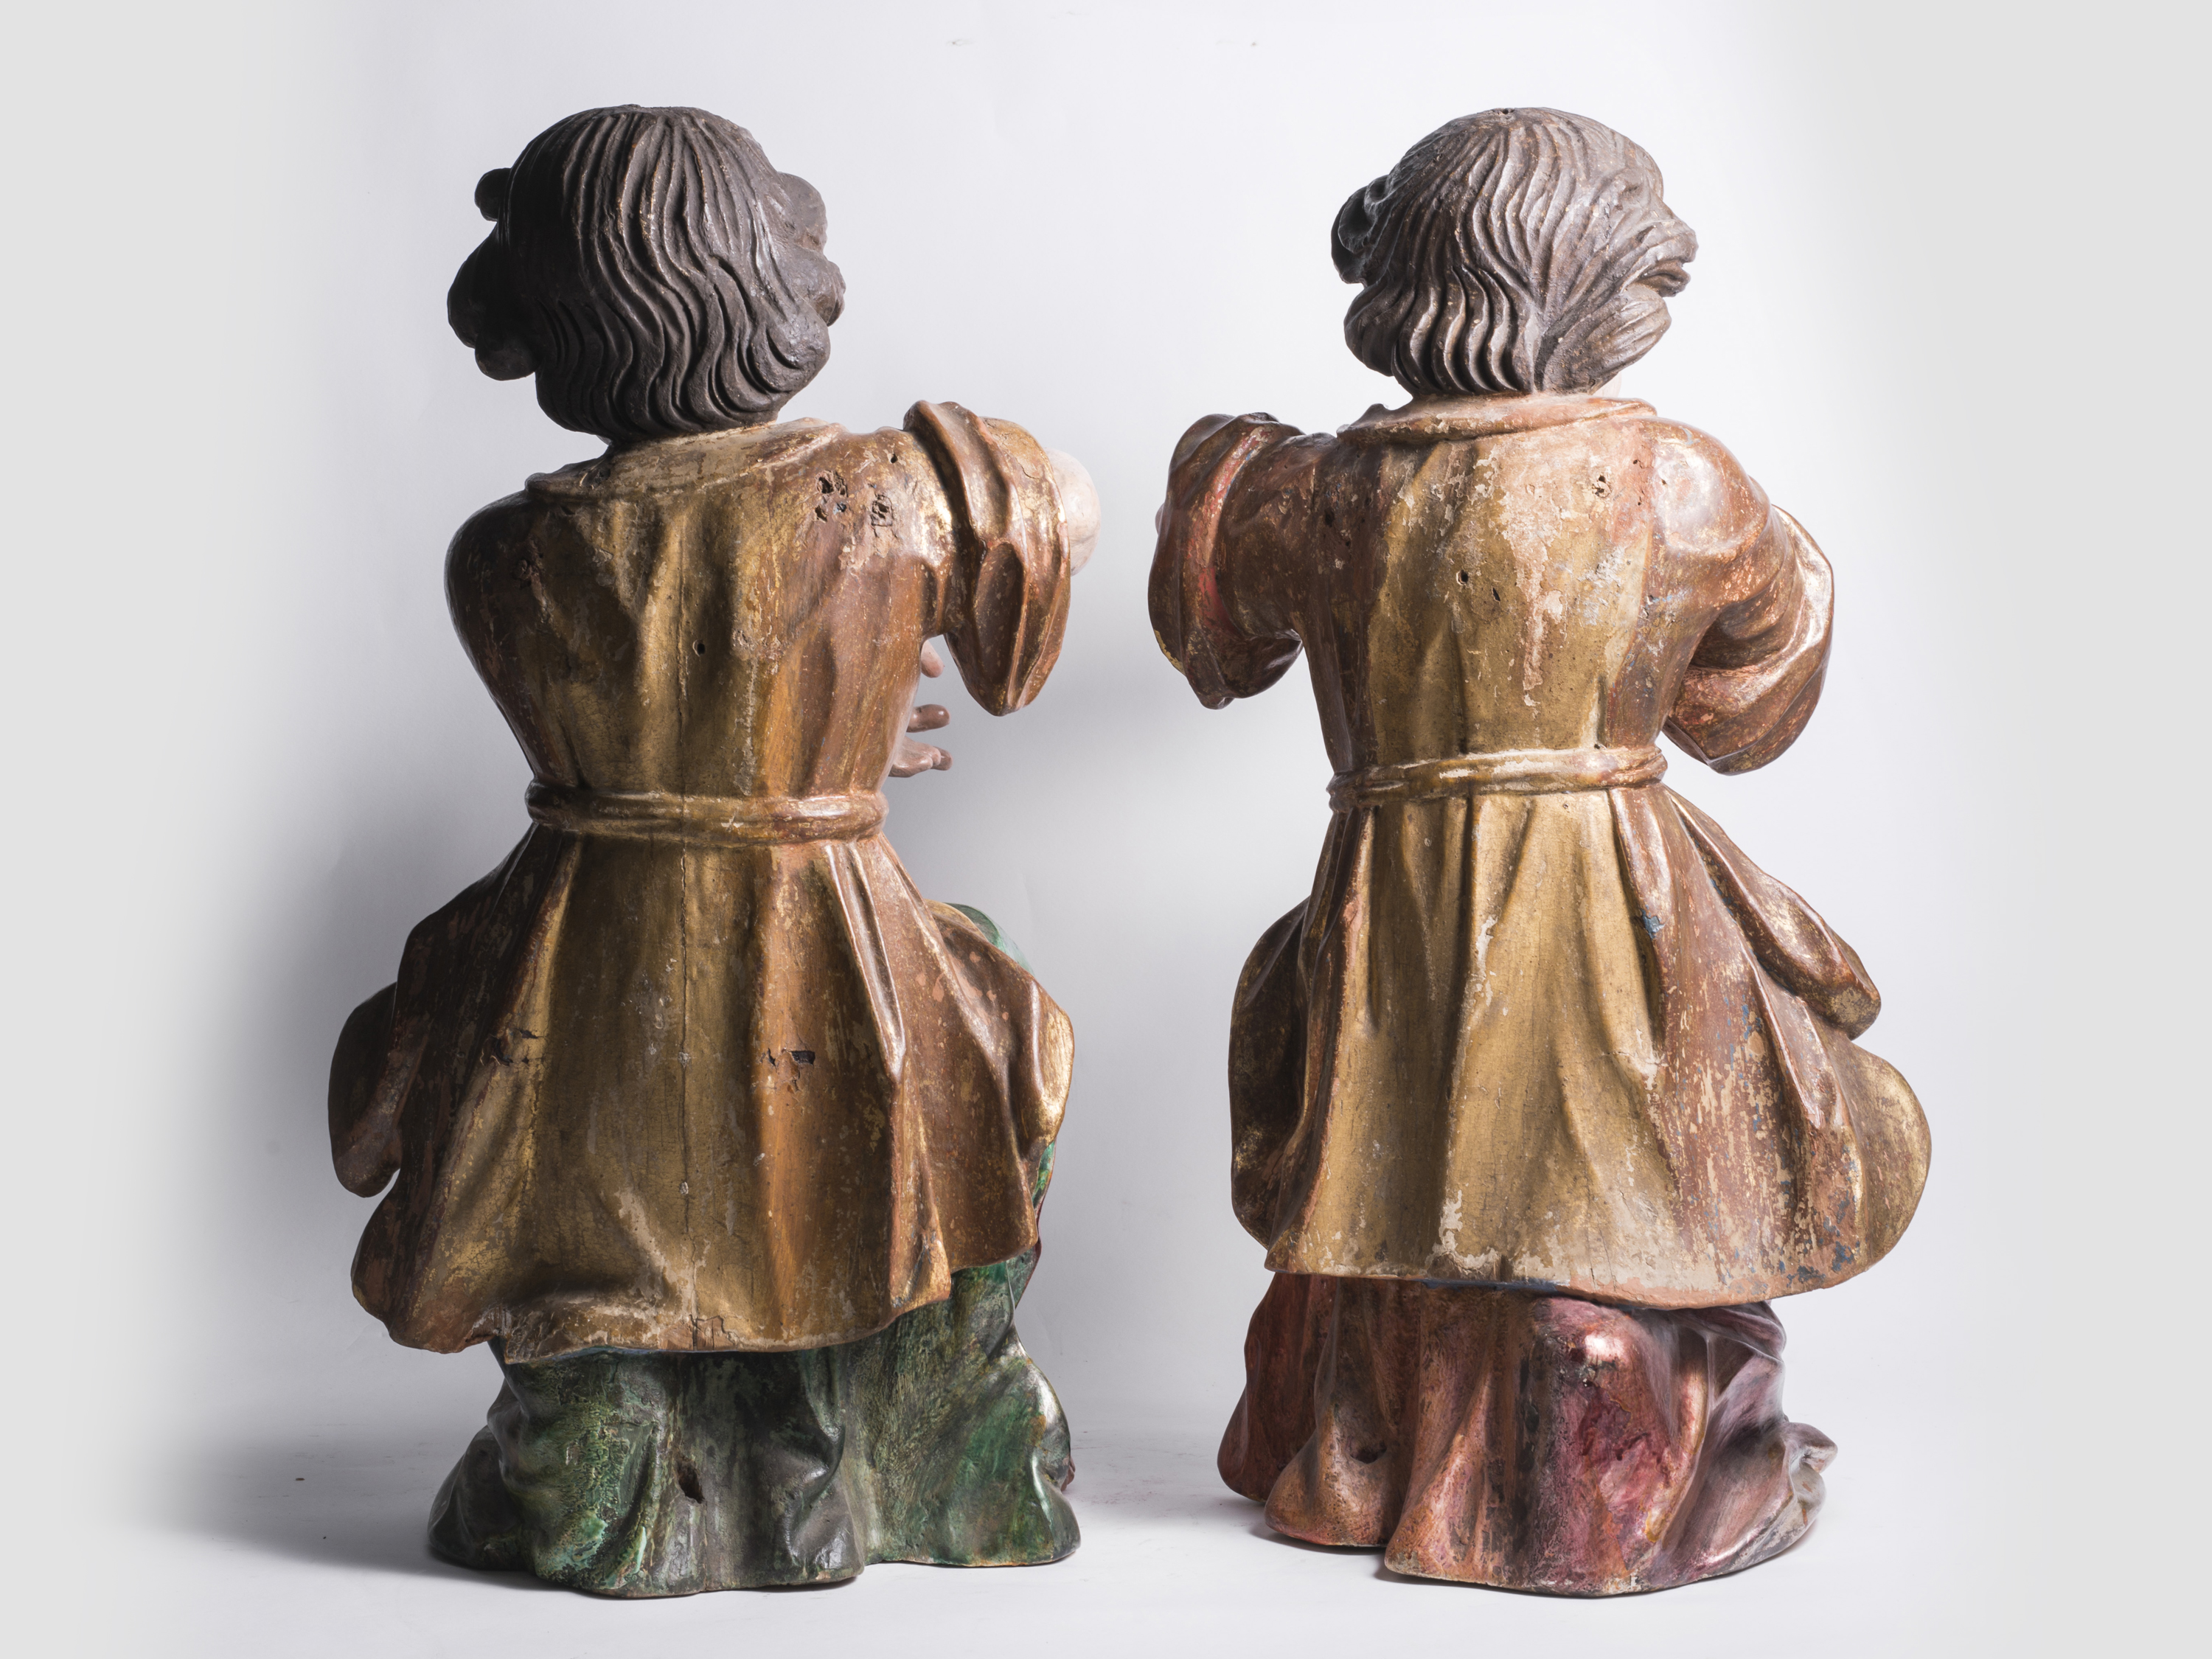 Pair of sconce angels, South German, Baroque, 17th/18th century - Image 7 of 9